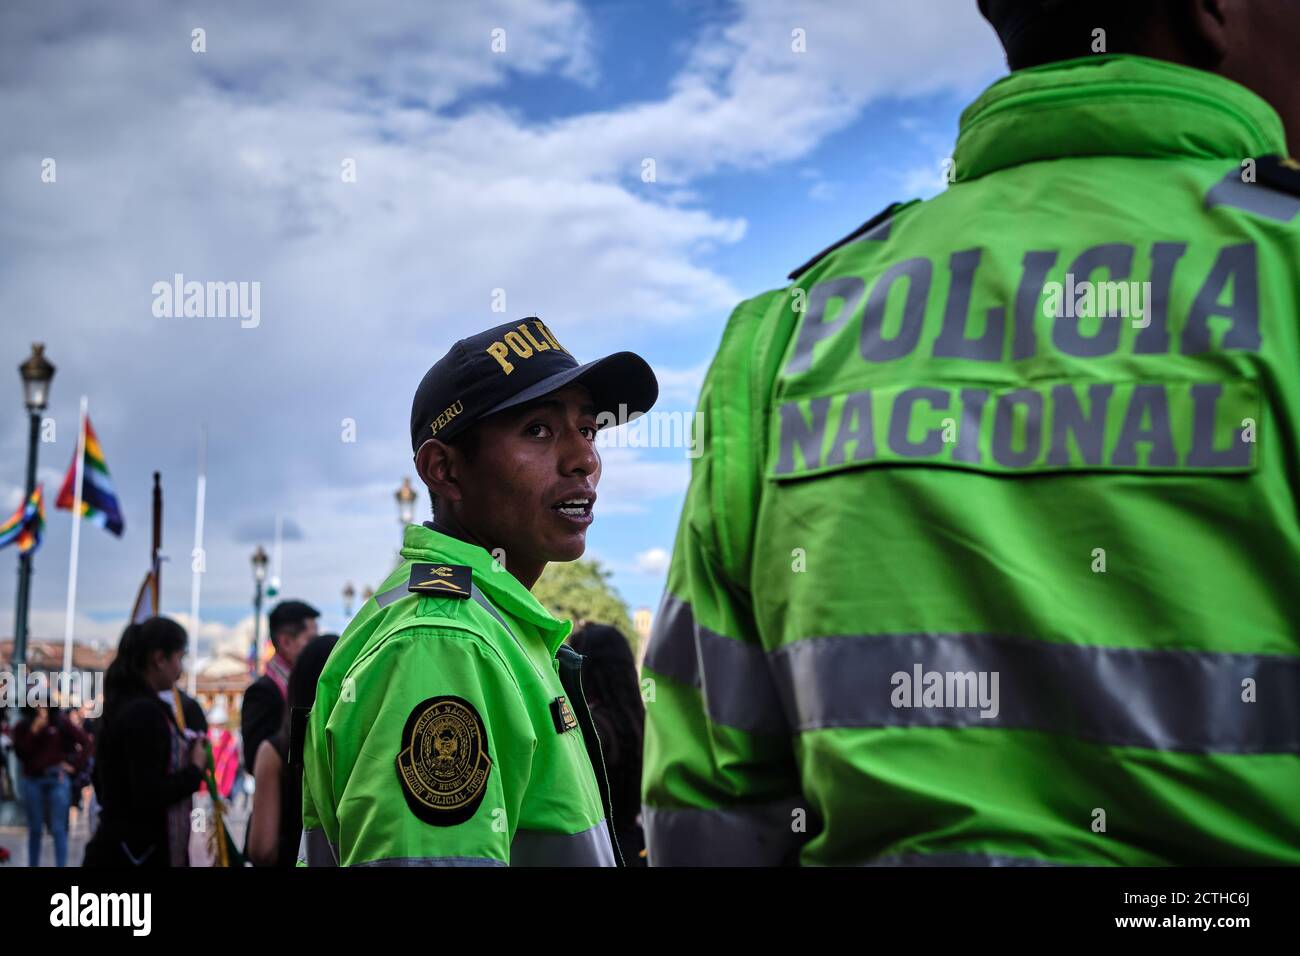 Two male police officers of the Peruvian Policia Nacional patrolling during the Inti Raymi'rata sun festival over the winter solstice, Cusco, Peru Stock Photo